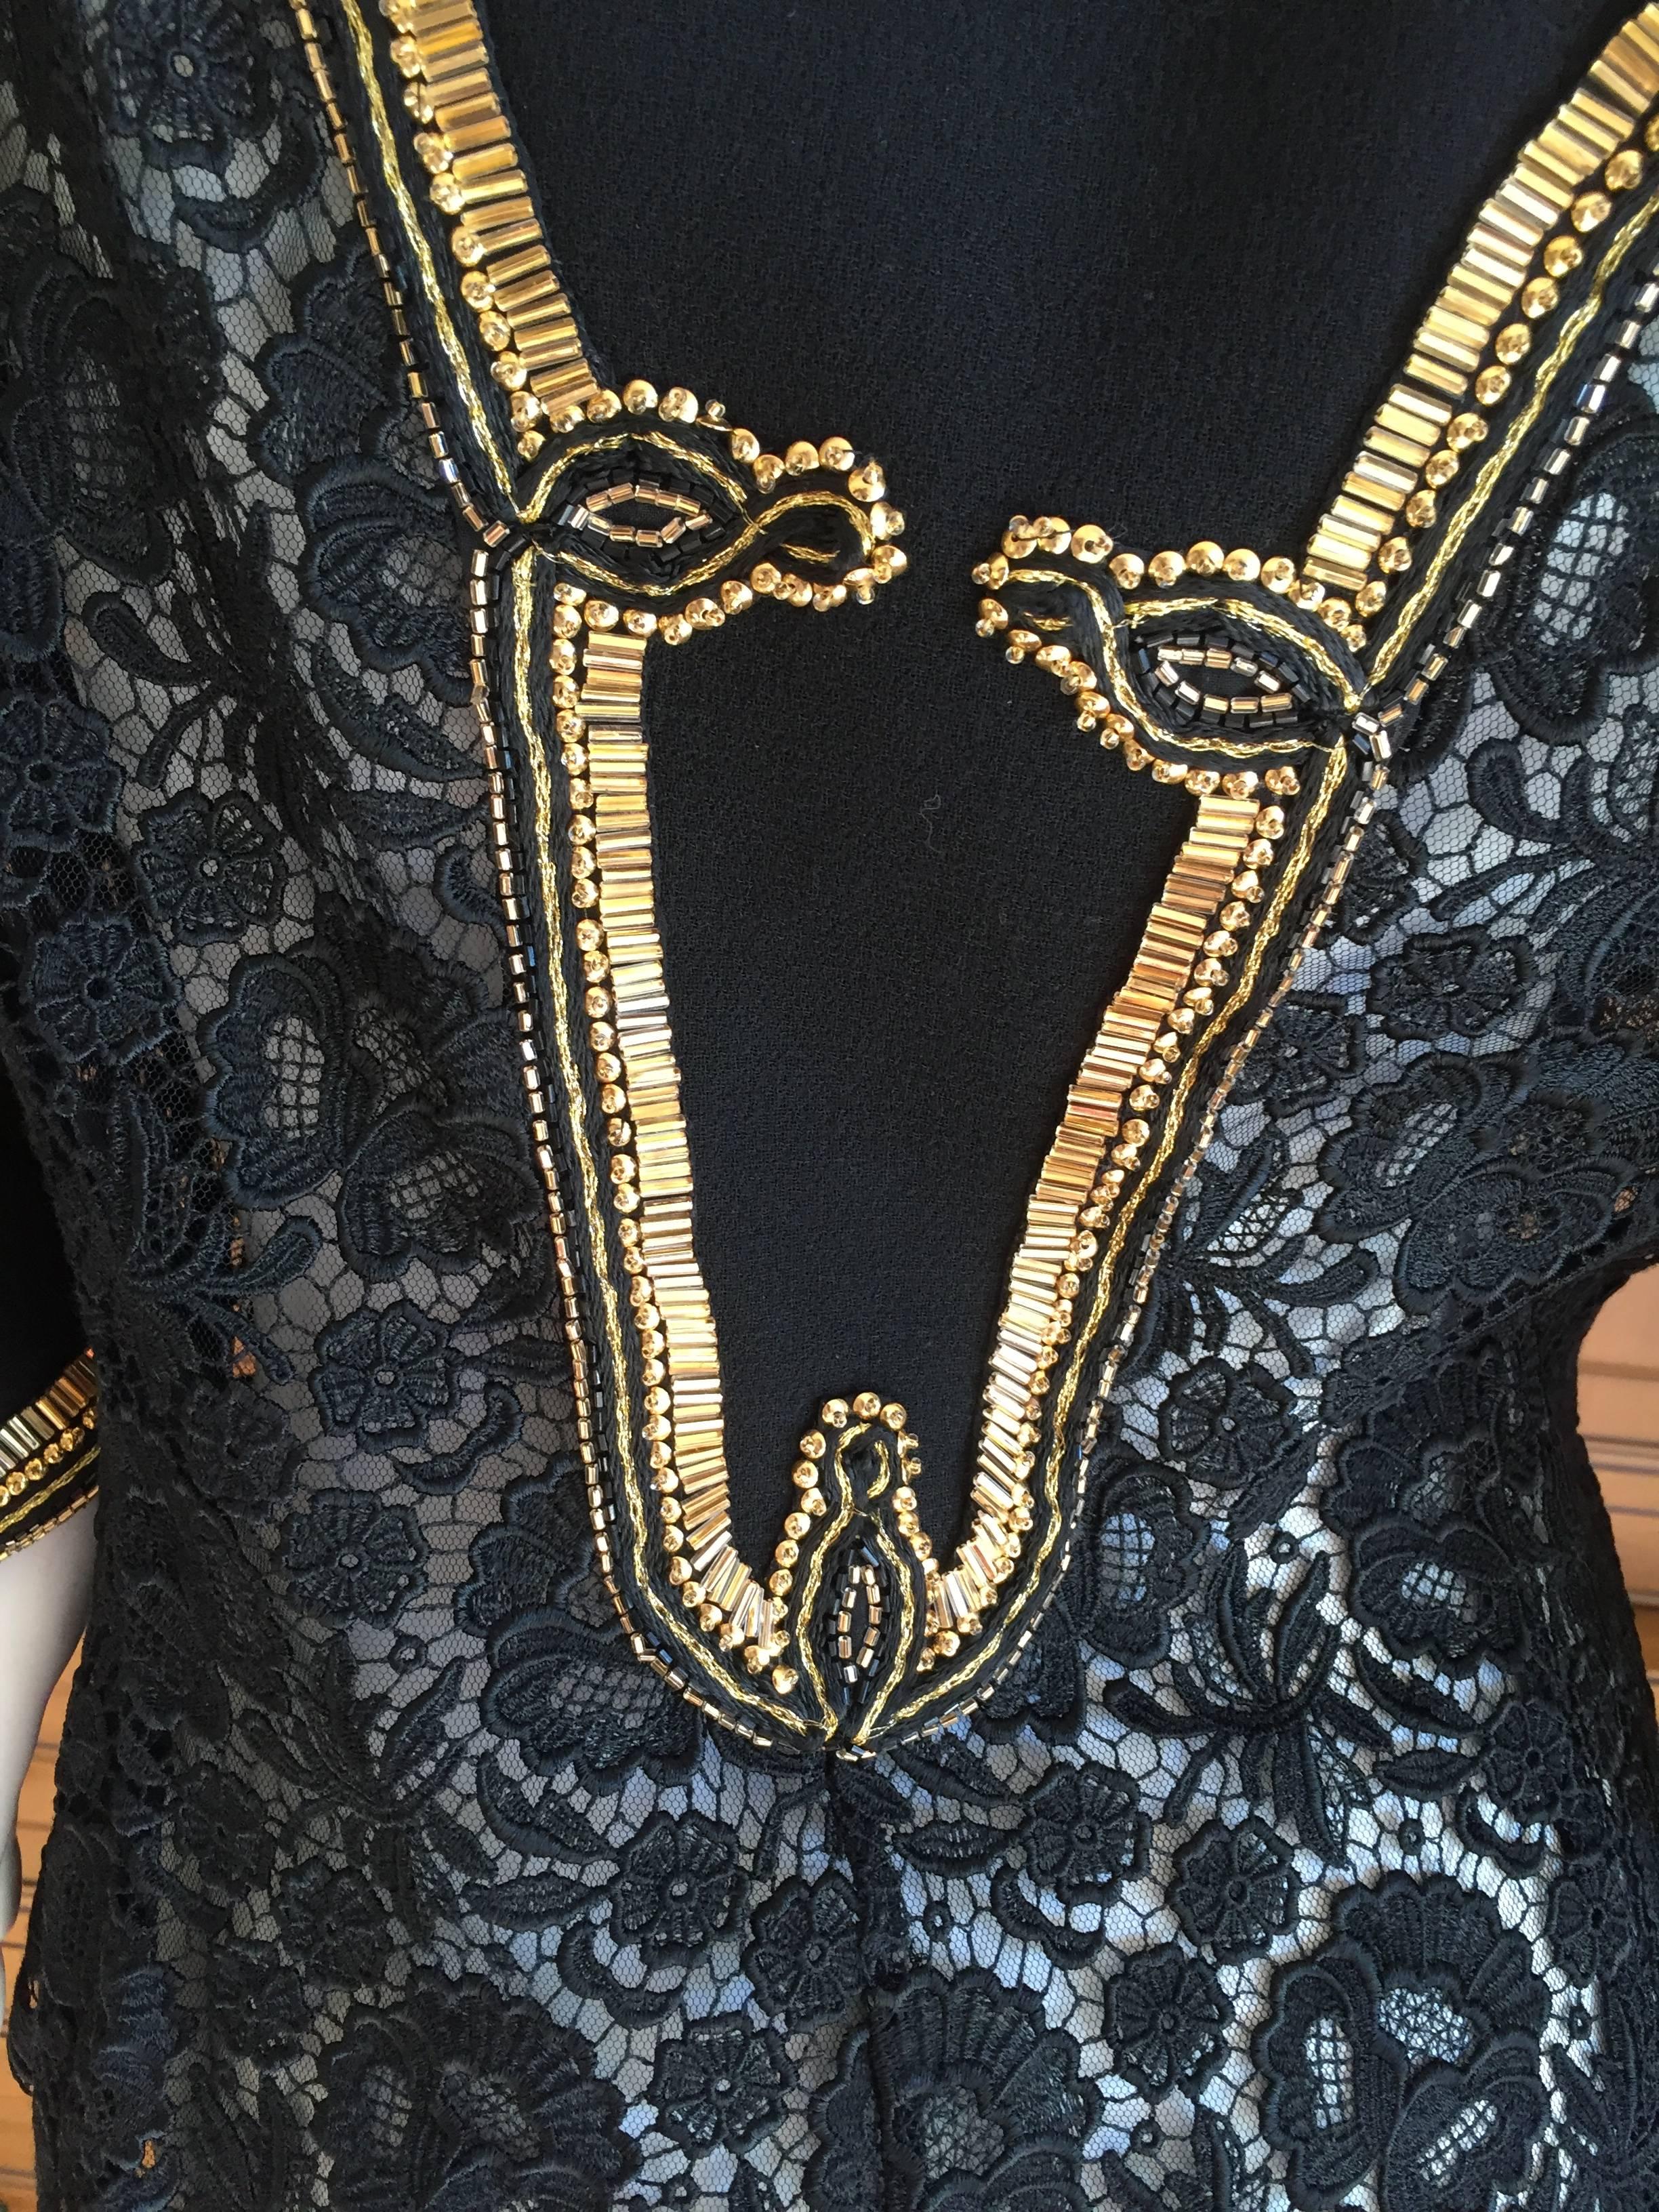 Gianni Versace Couture 1992 Beaded Black Lace Jacket For Sale 3